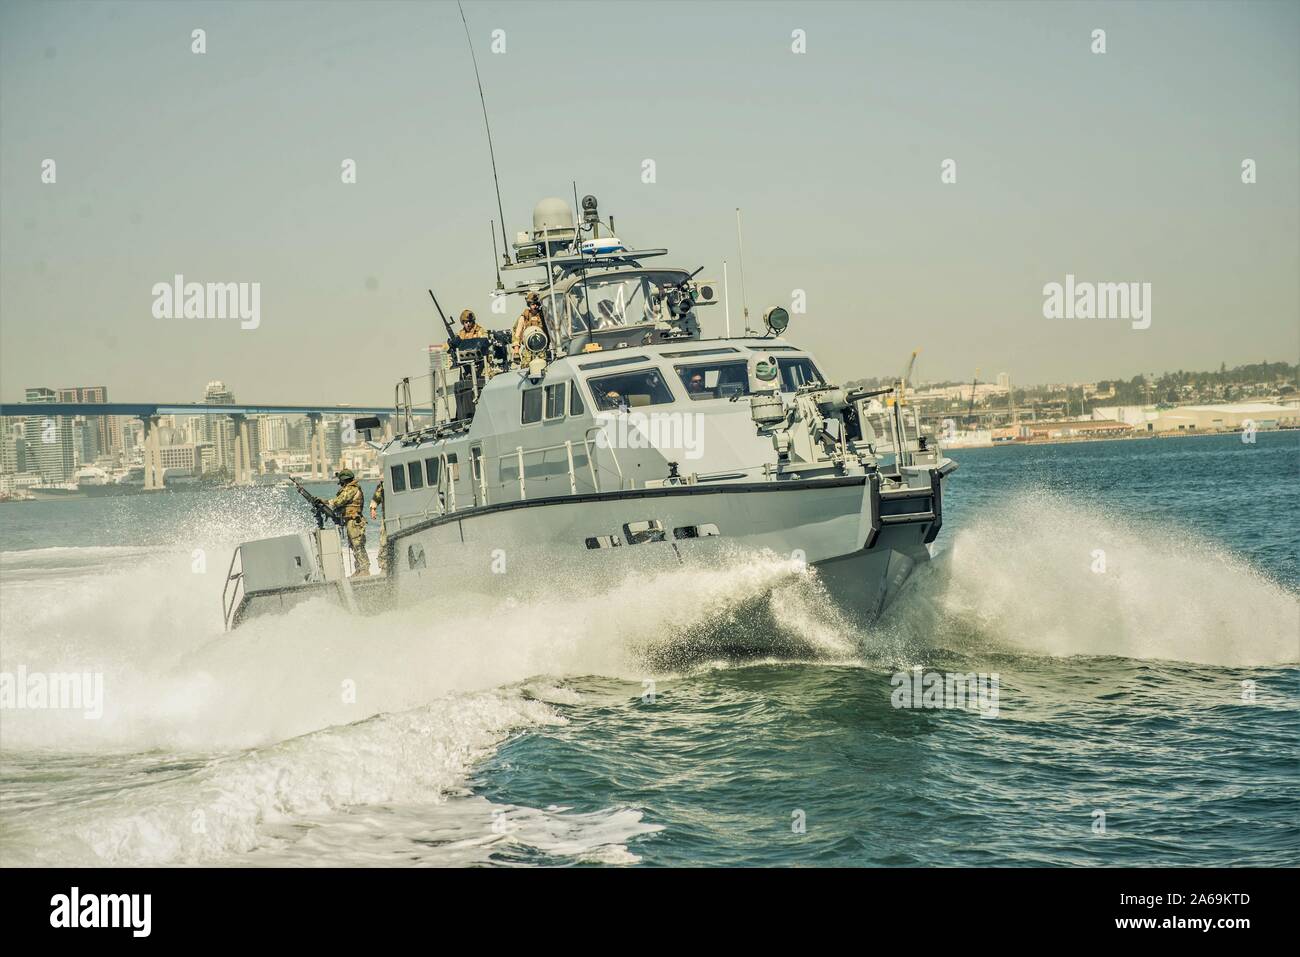 191010-N-NT795-301 SAN DIEGO (Oct. 10, 2019) Sailors assigned to Coastal Riverine Squadron (CRS) 3, are underway aboard a MKVI patrol boat during unit level training provided by Coastal Riverine Group (CRG) 1 Training and Evaluation Unit. The Coastal Riverine Force is a core Navy capability that provides port and harbor security, high value asset security, and maritime security operation in the coastal and inland waterways. (U.S. Navy photo by Chief Boatswain’s Mate Nelson Doromal Jr) Stock Photo